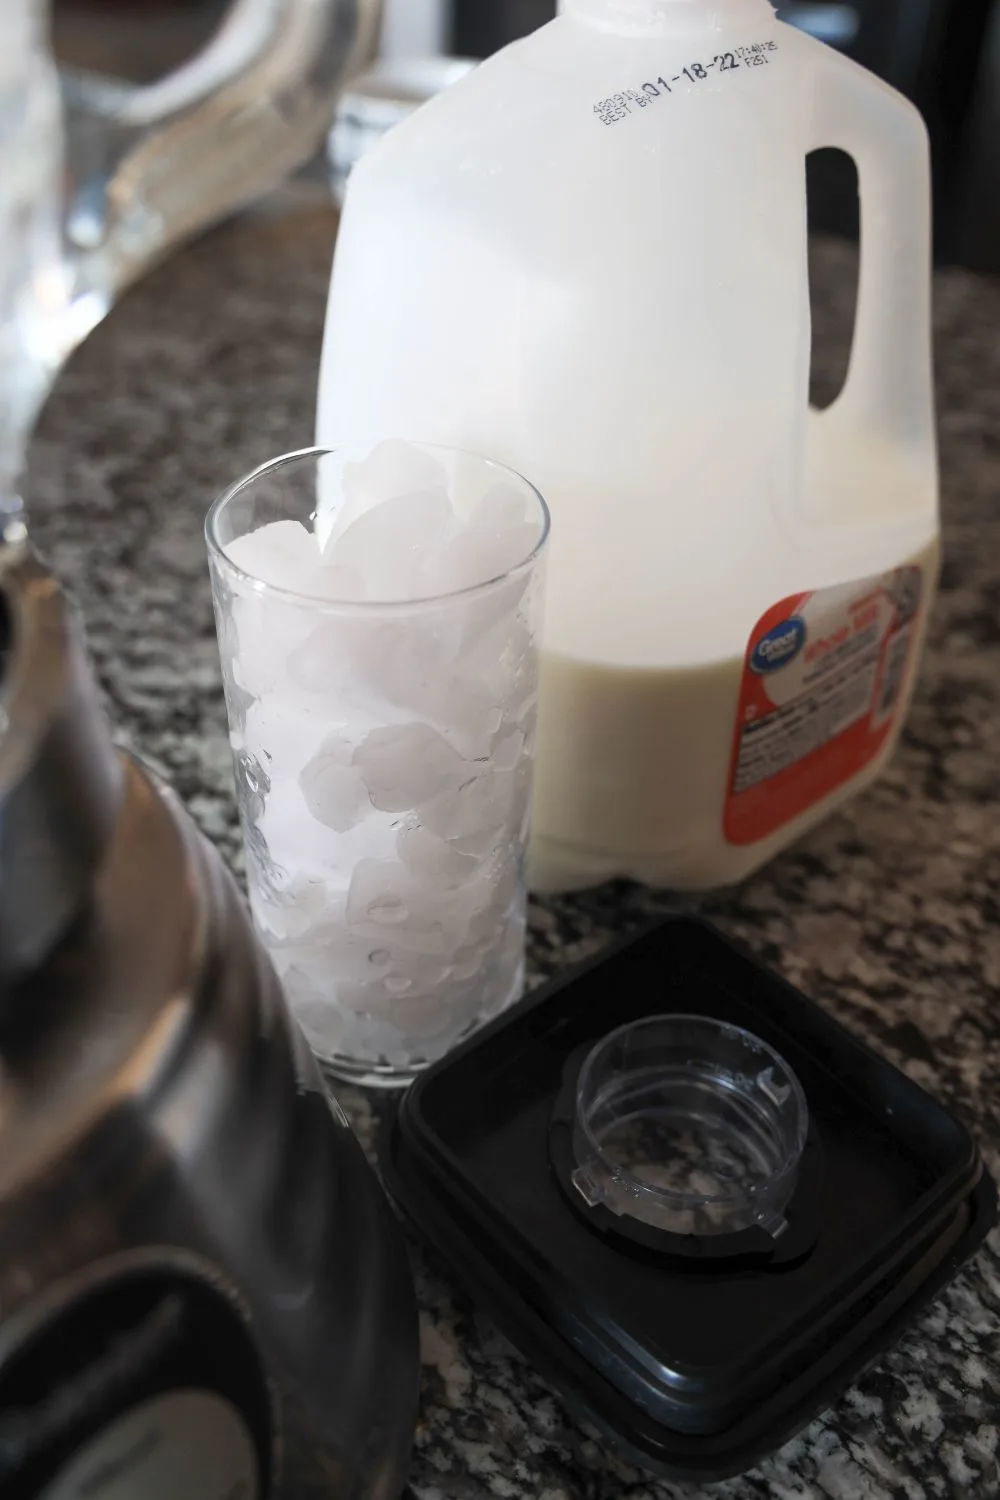 ice cubes in a glass beside a blender and a jug of milk.